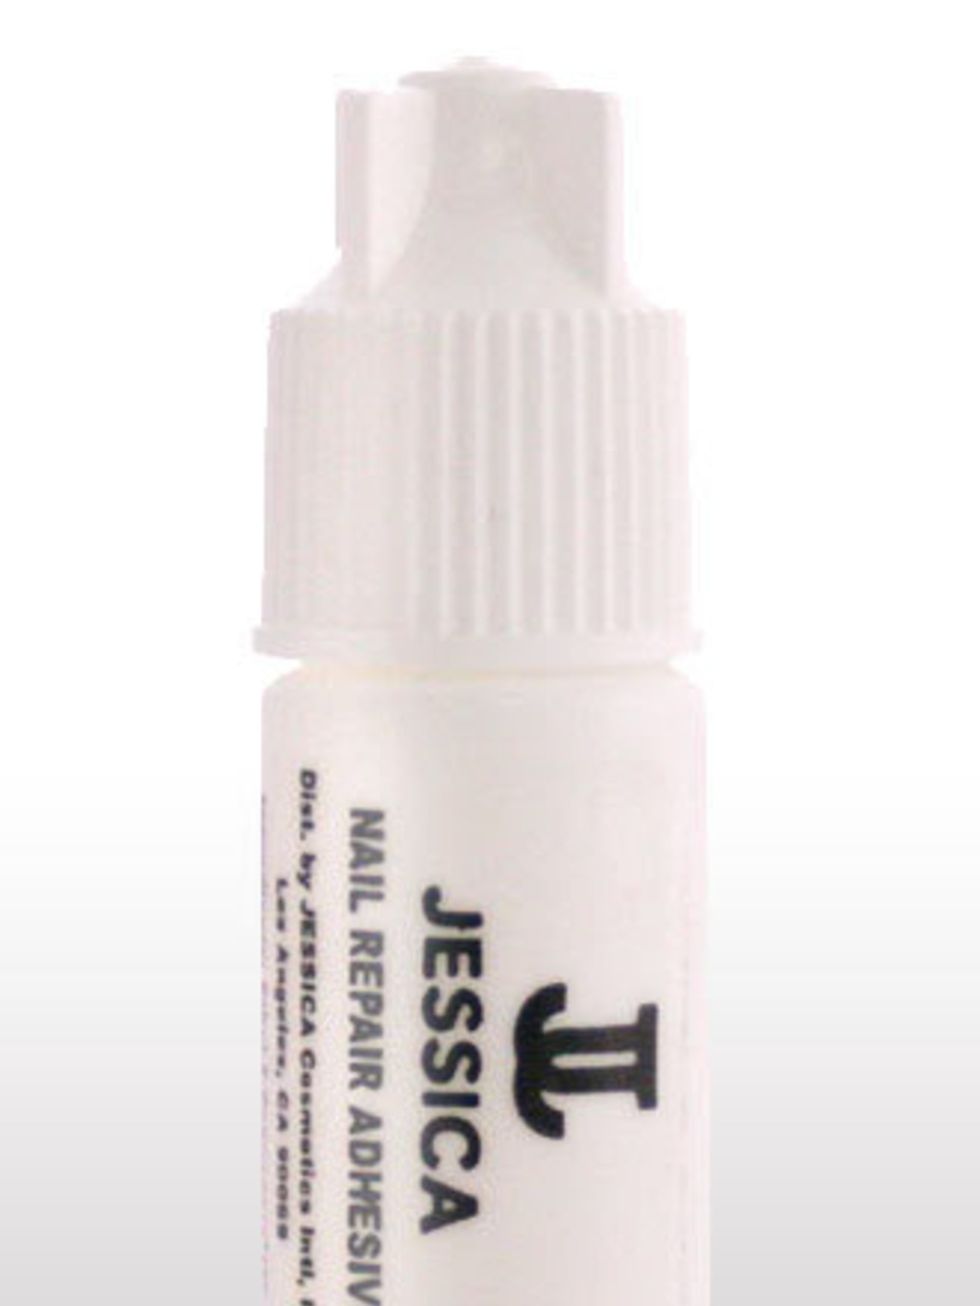 <p>A broken nail is sure to ruin your manicure and snag on everything. Prevent full-on breakages with Jessicas Repair Adhesive and use it to patch up any splits and cracks in your nail too. </p><p><a href="http://www.jessicacosmetics.co.uk/">Jessica</a> 